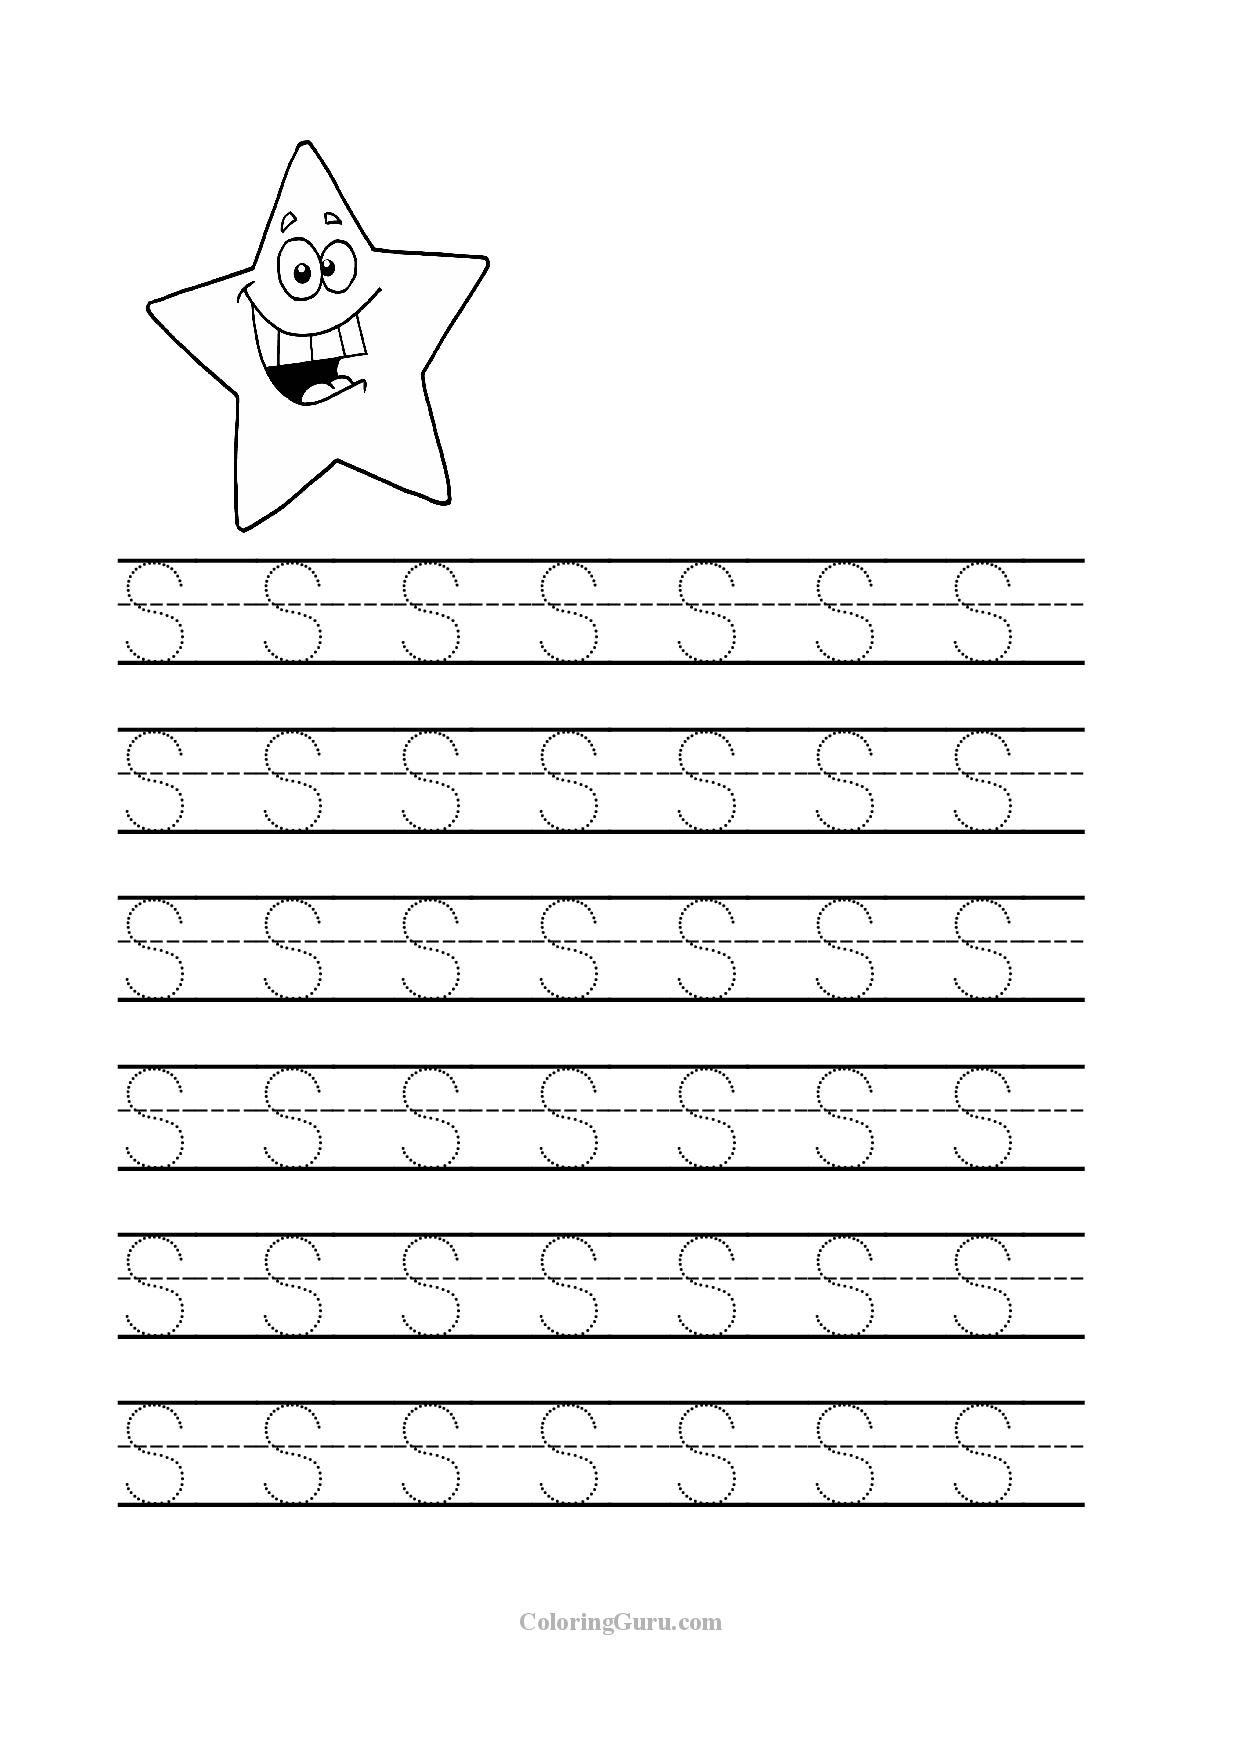 Free Printable Tracing Letter S Worksheets For Preschool with Tracing Letter I Worksheets